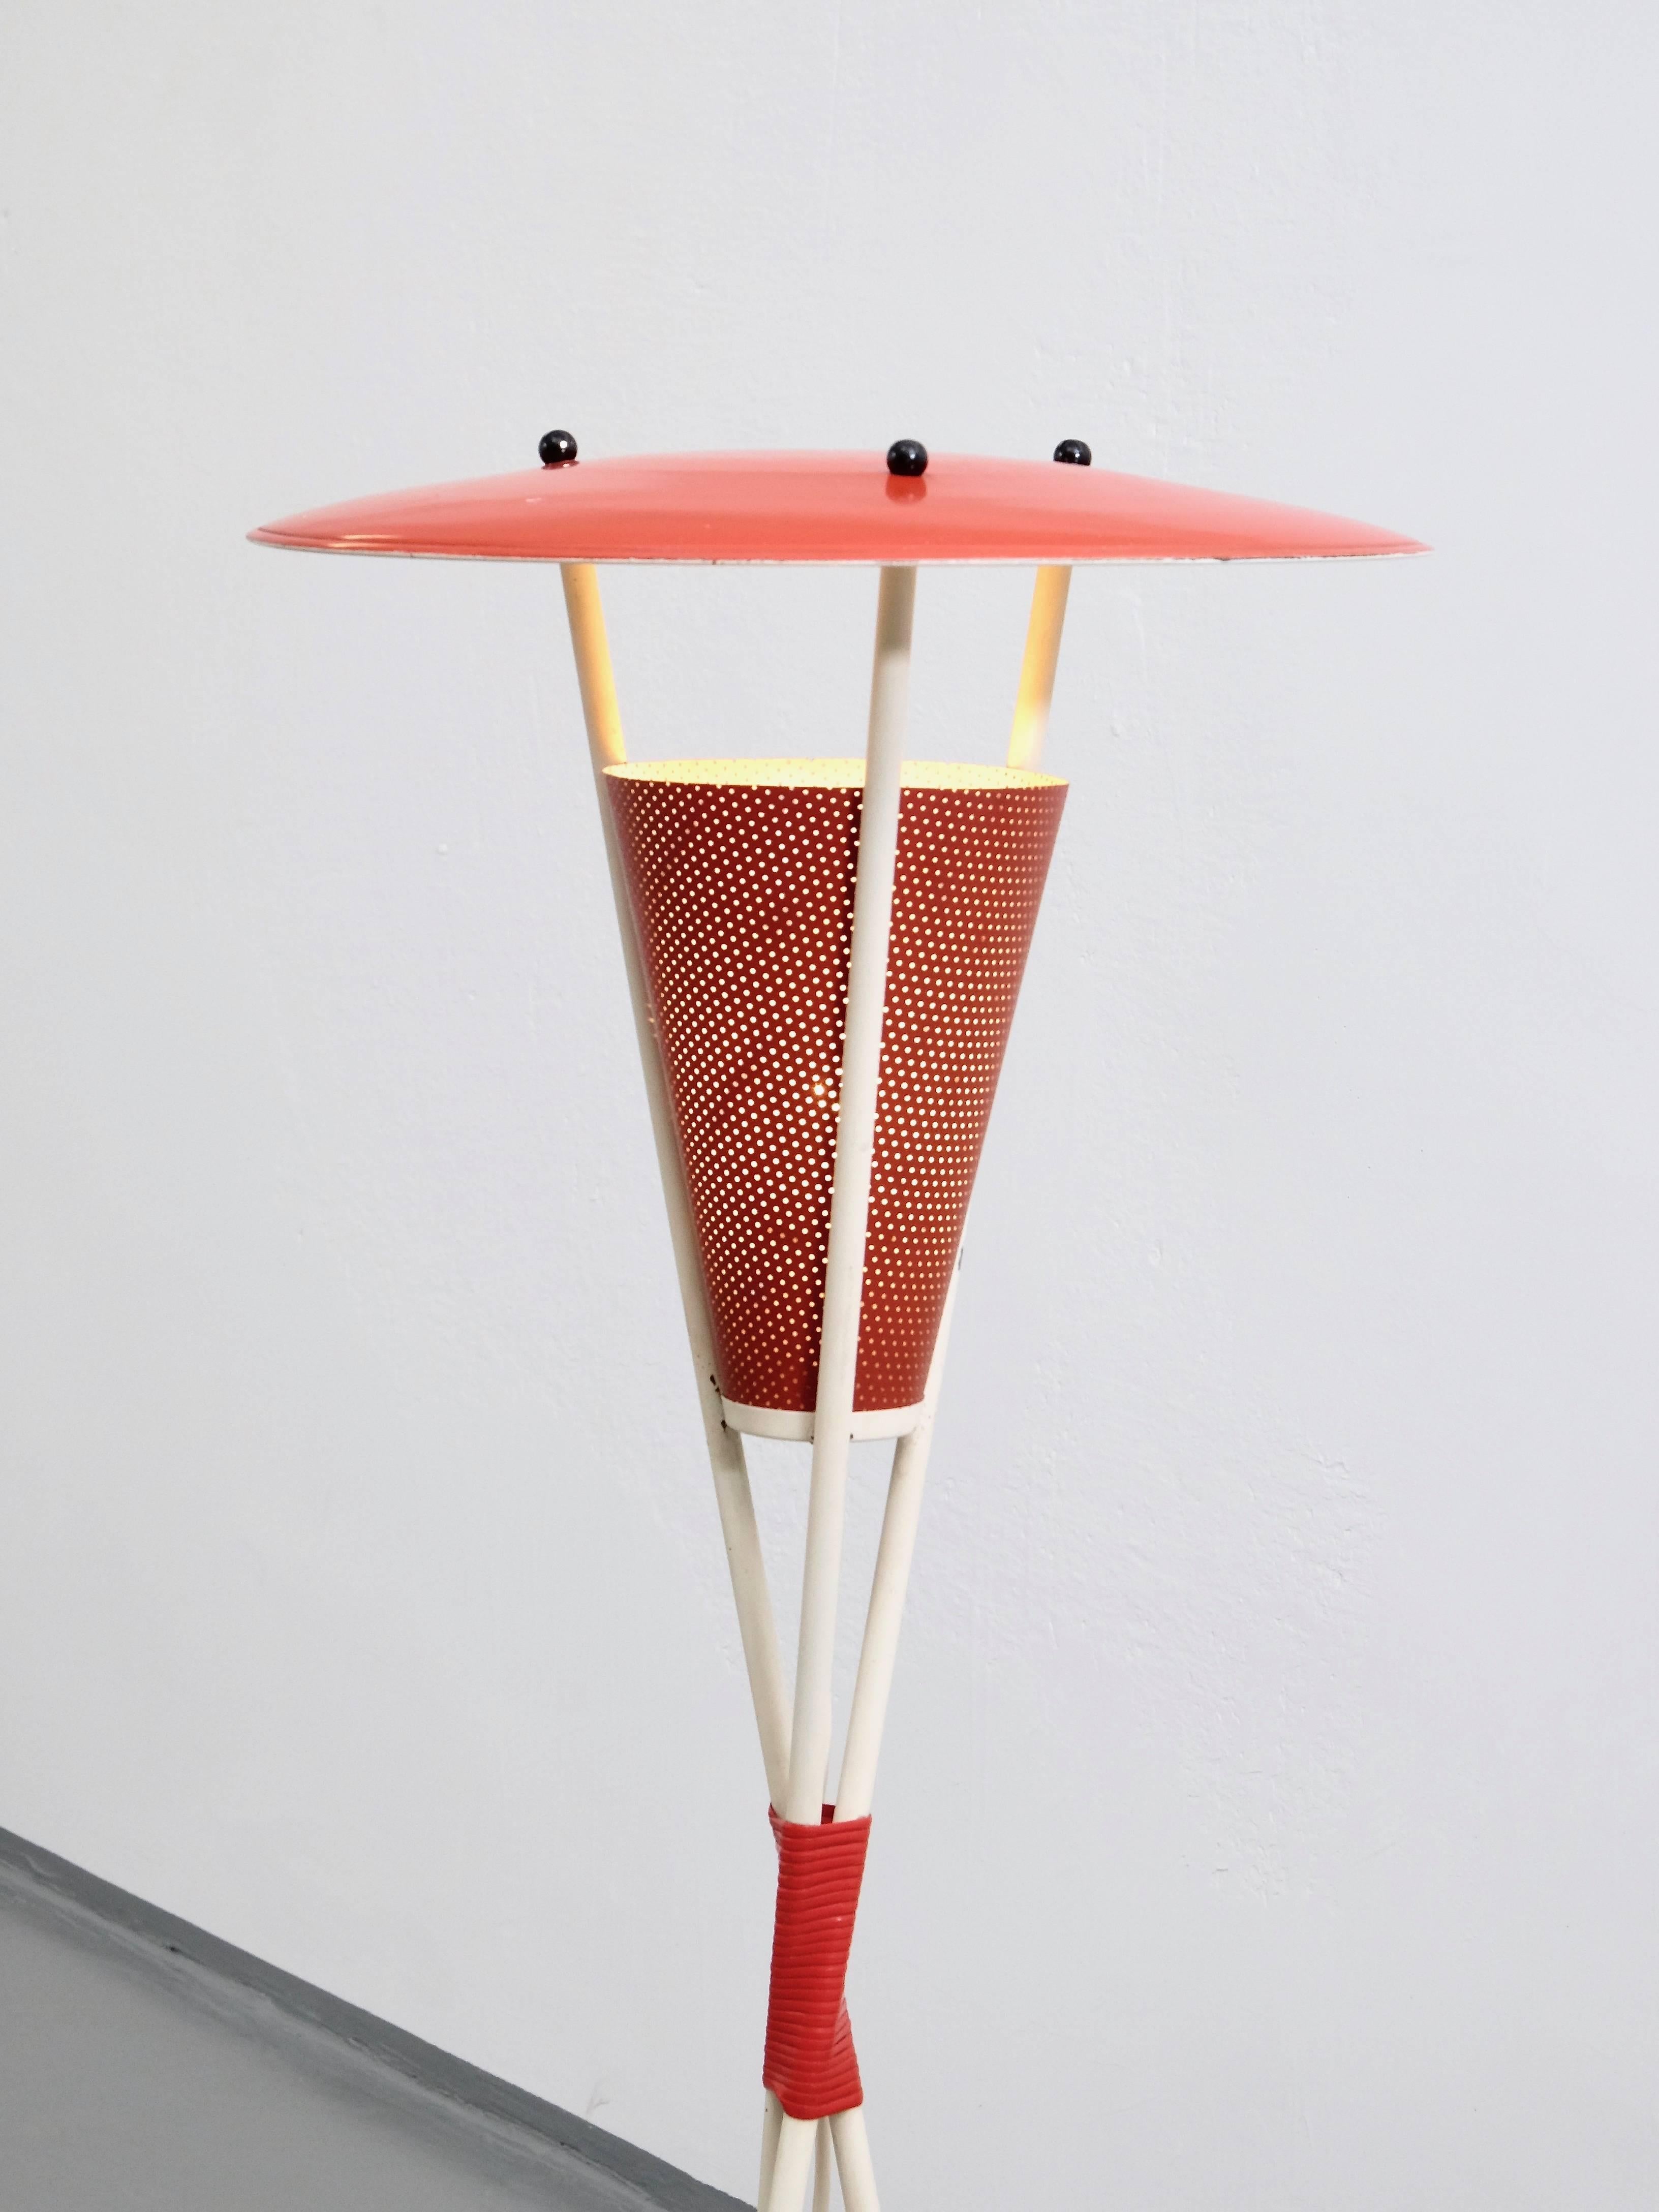 Midcentury tripod floor lamp from Holland. This lamp has a white tripod base, black spherical ball screws and it is wrapped in the middle with red plastic. The shade and the diffuser is lacquered red. It is in a good original condition, small marks